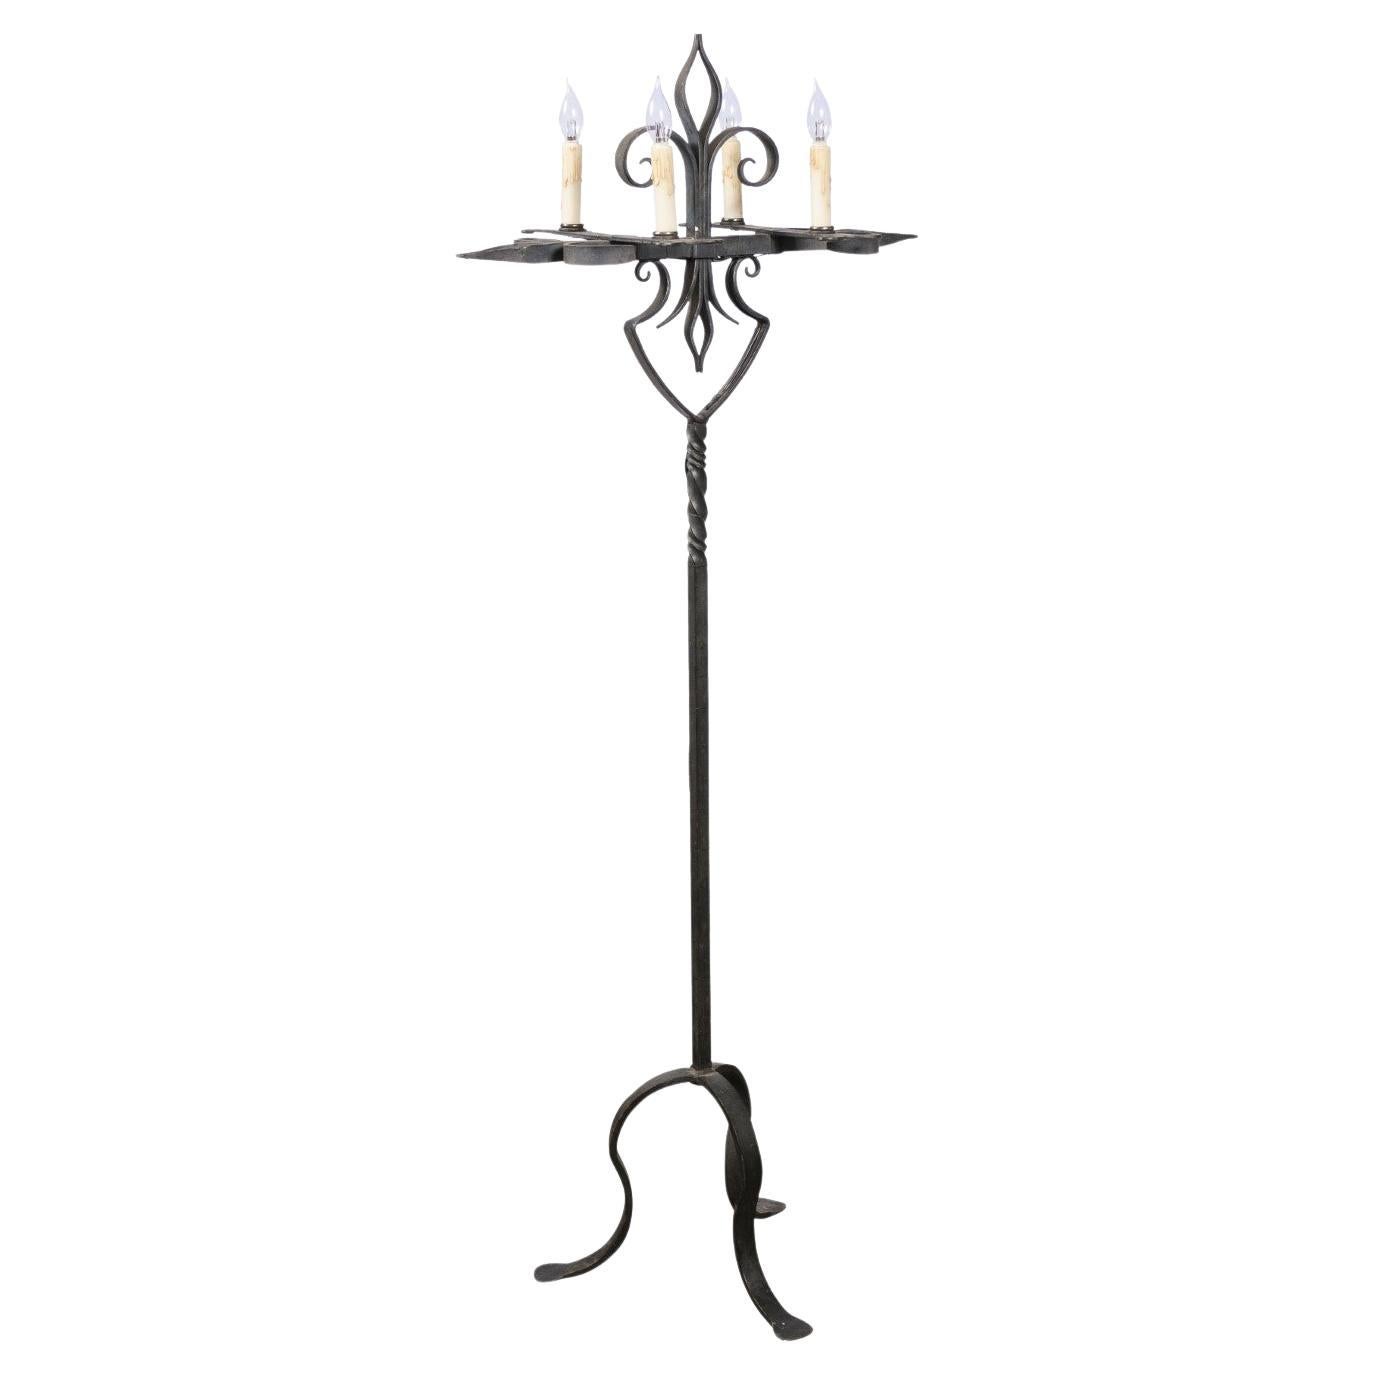 French Turn of the Century Candelabras Style Four-Light Wrought-Iron Floor Lamp For Sale